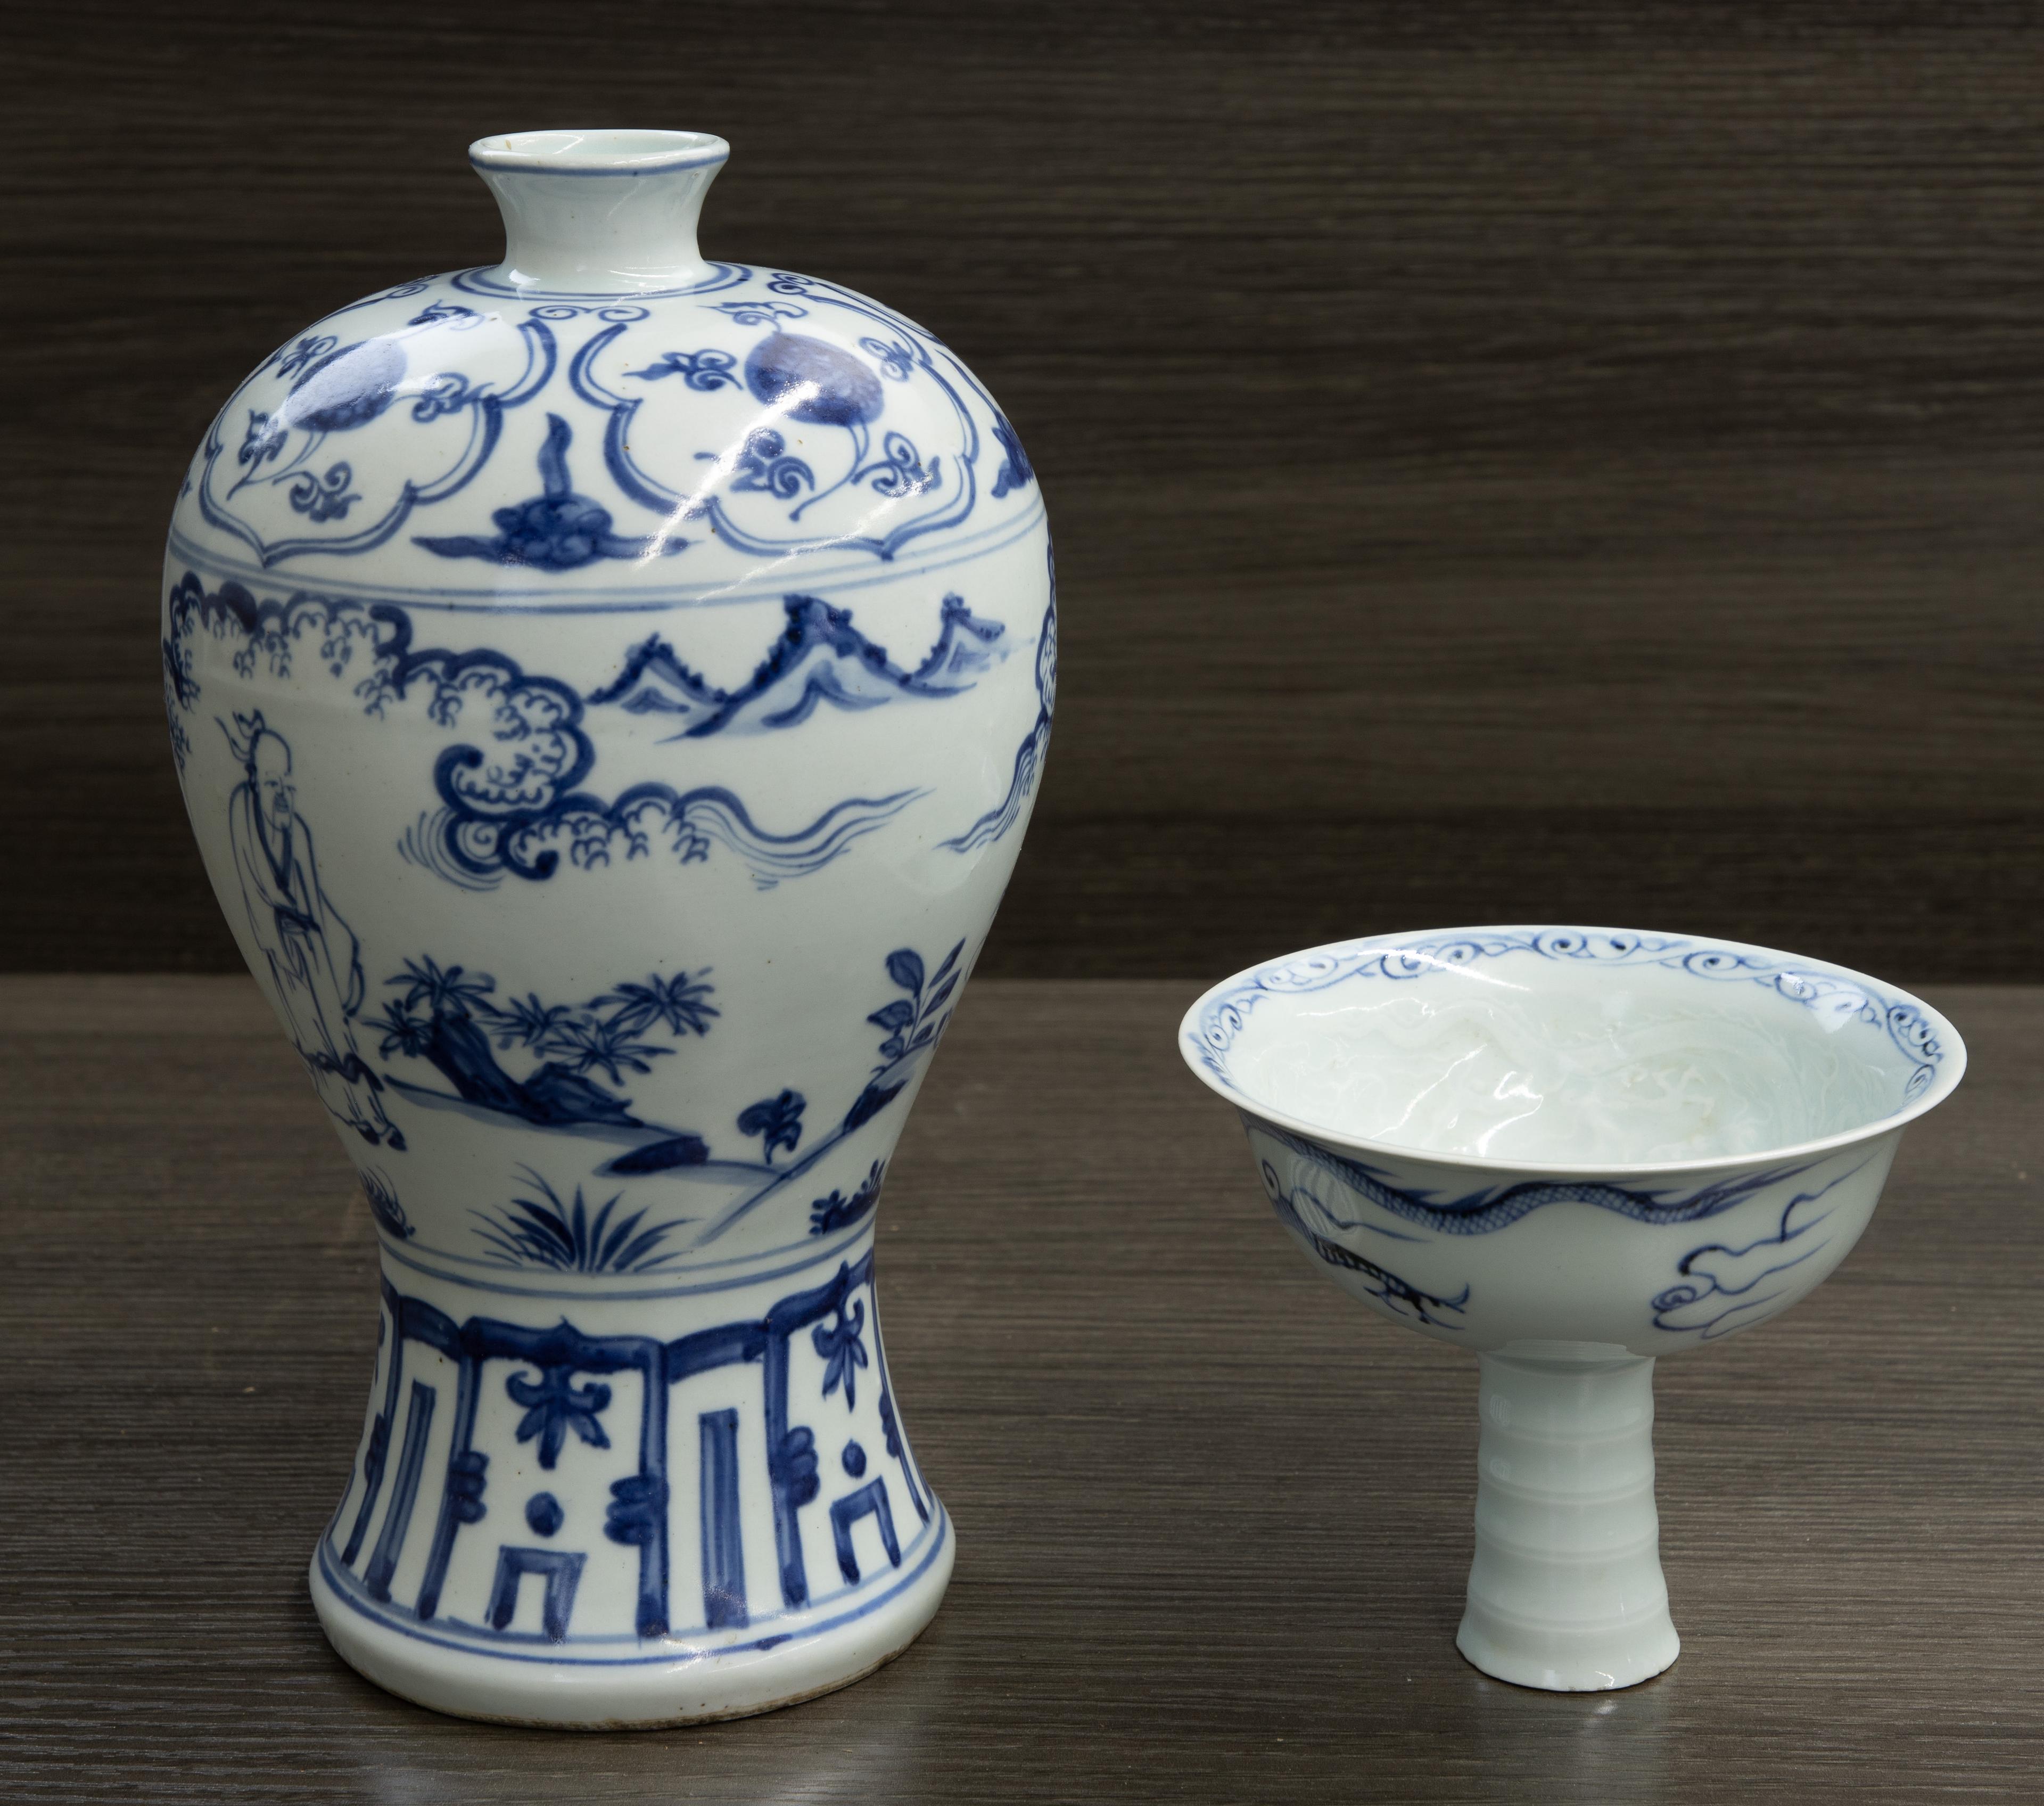 Chinese Blue and White Porcelain Meiping Vase and Stem Cup